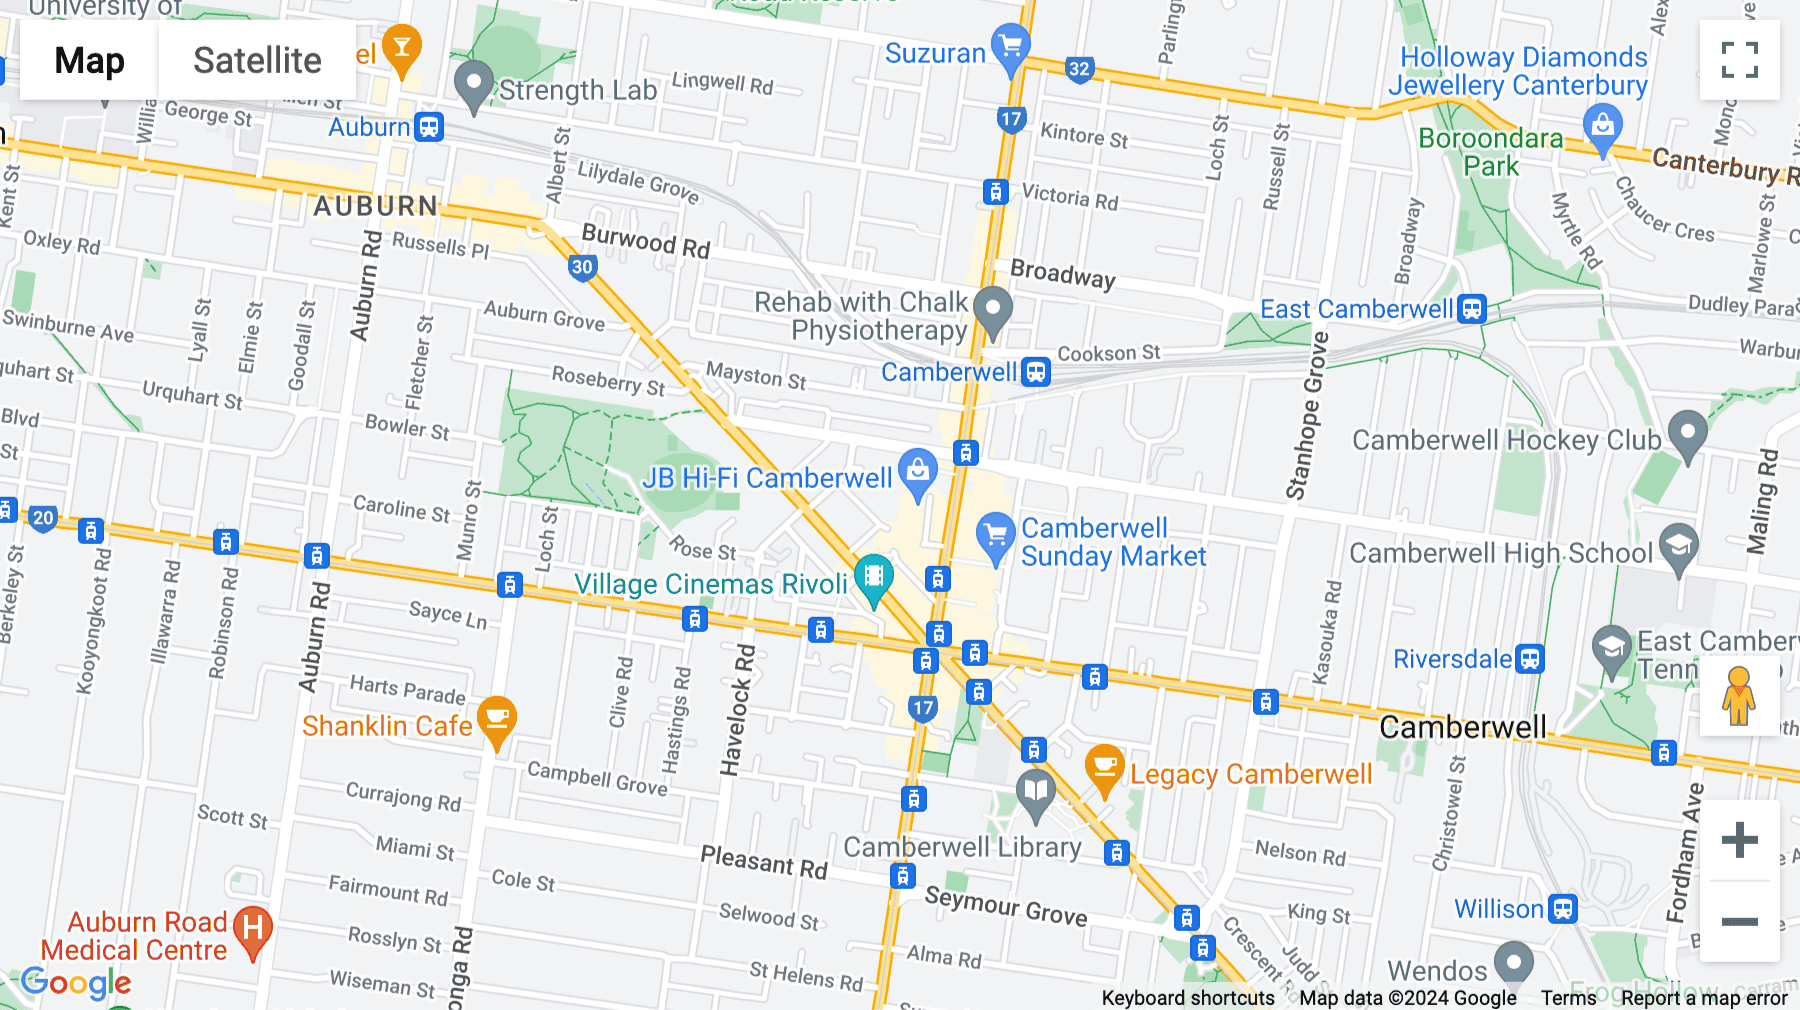 Click for interative map of 793 Burke Road, Camberwell Place, Melbourne